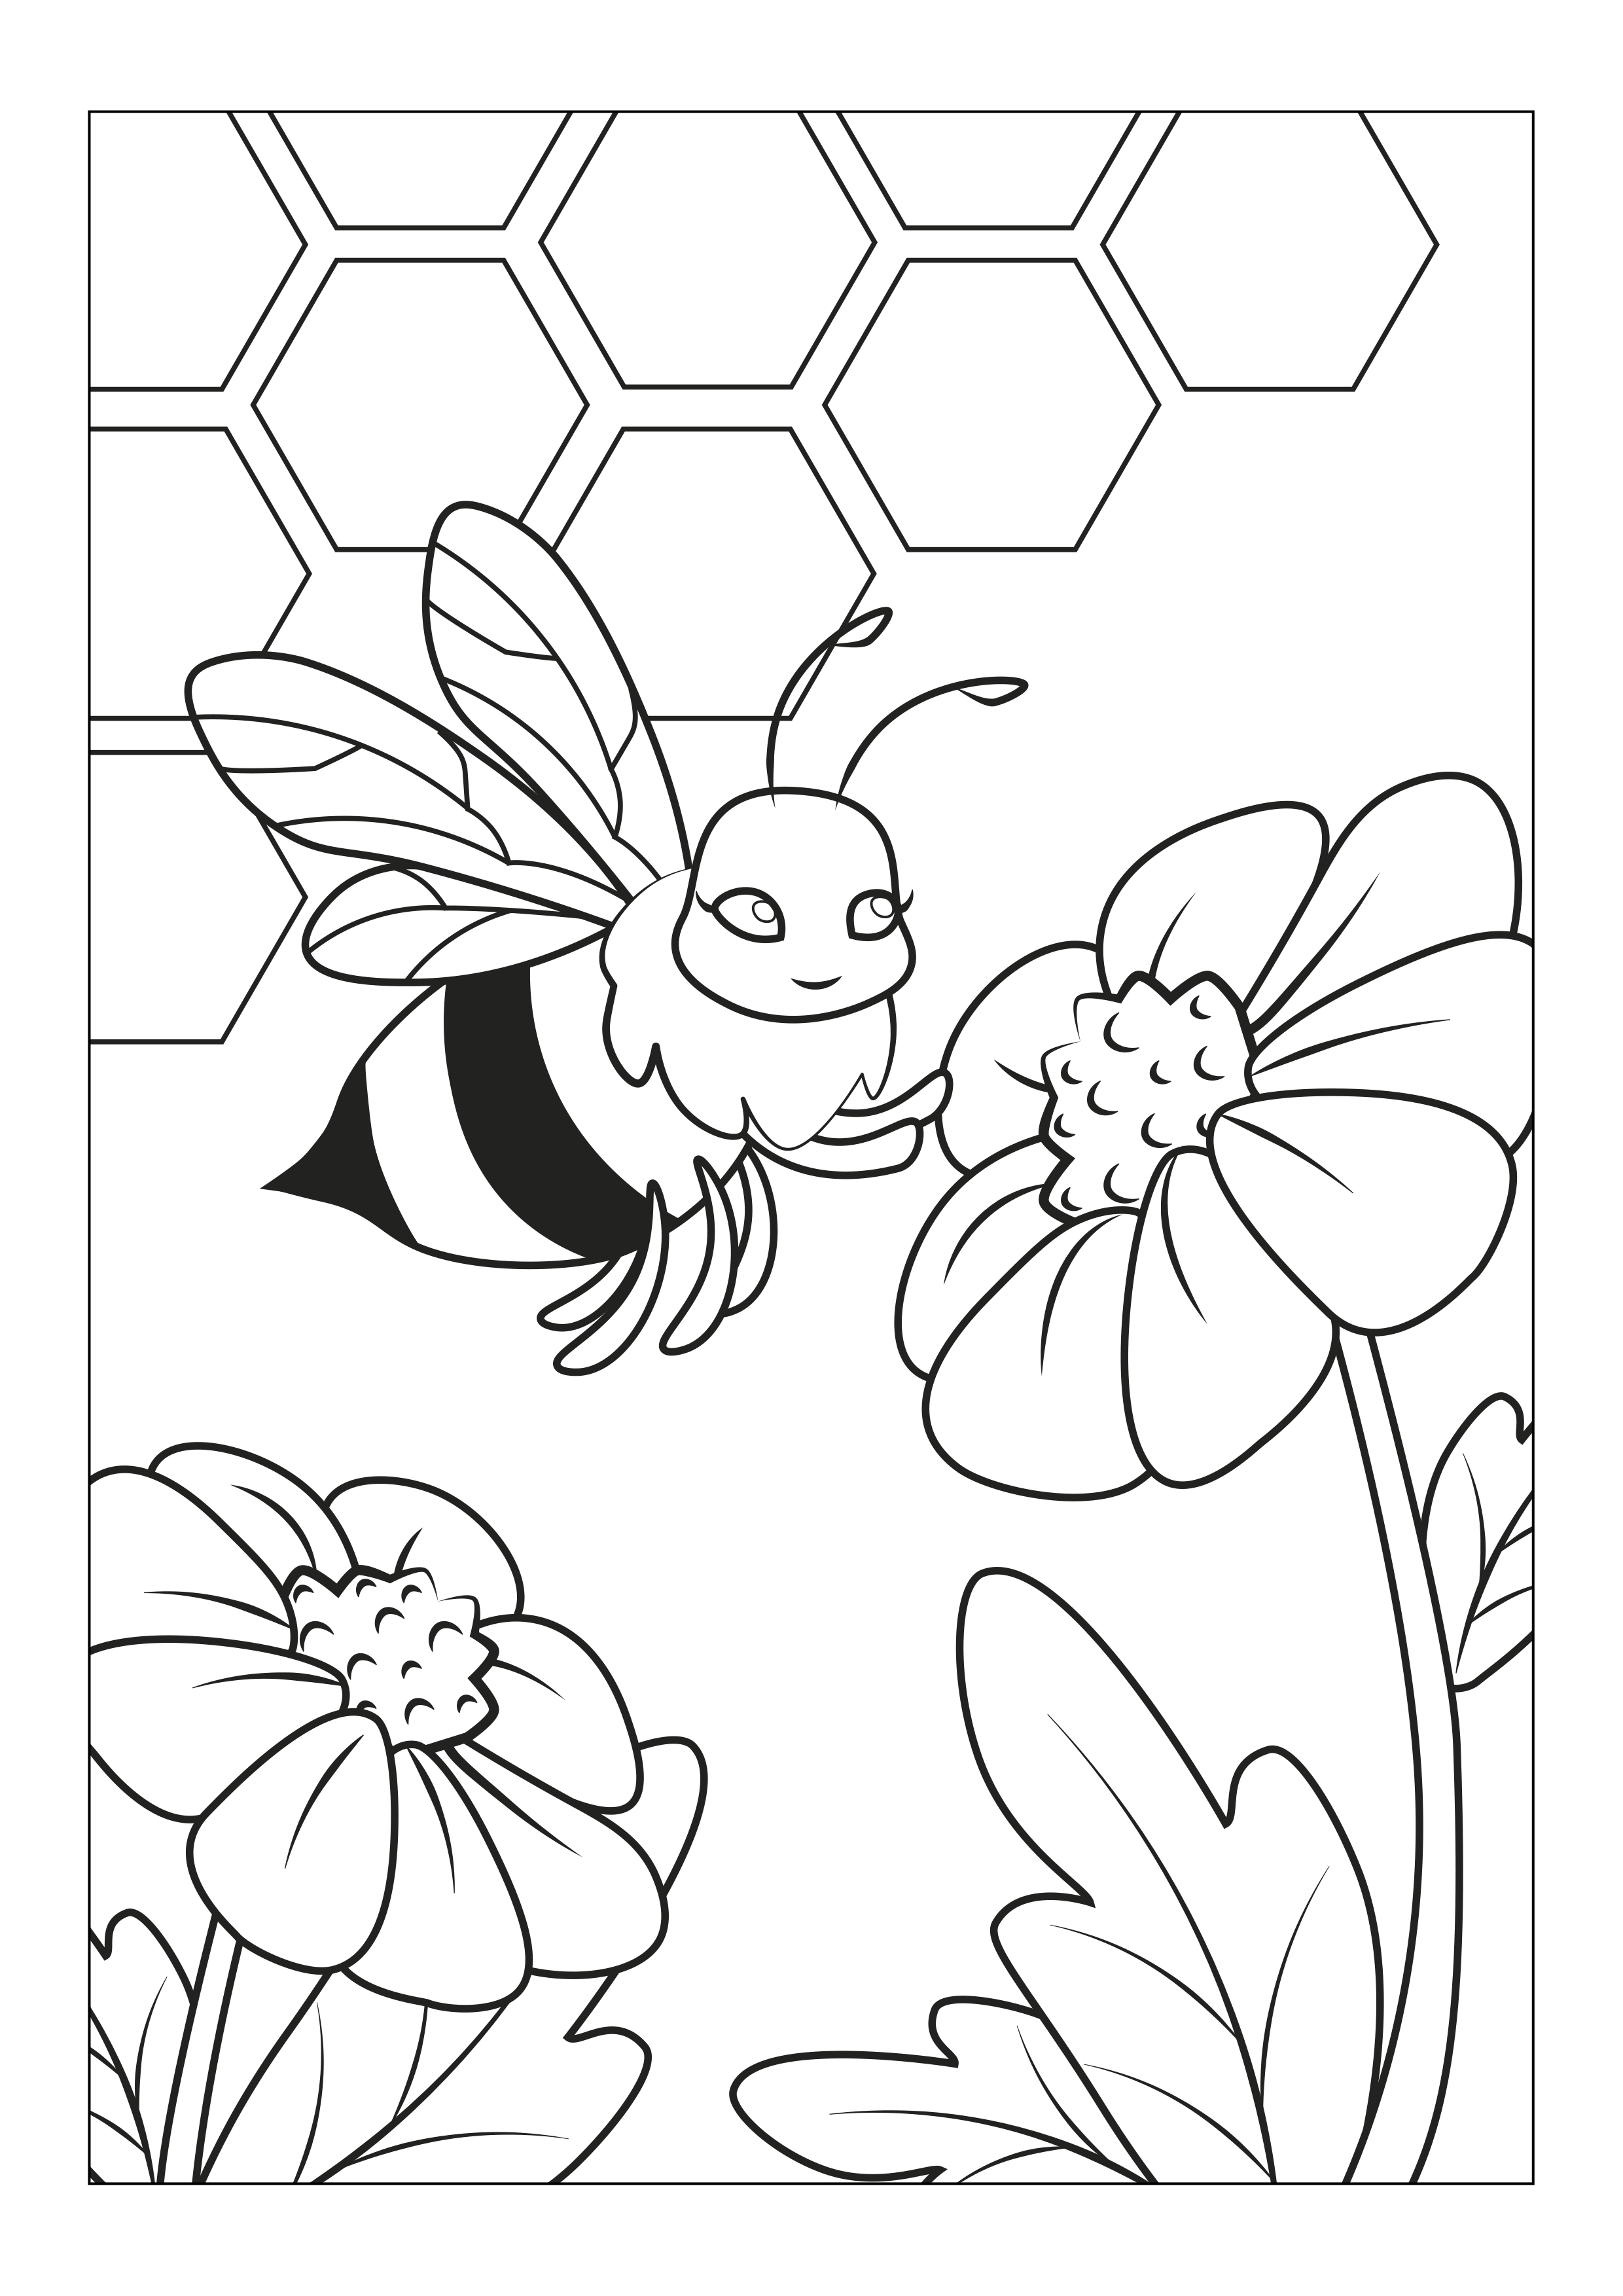 Free Online Coloring Pages With Super Cool Bugs